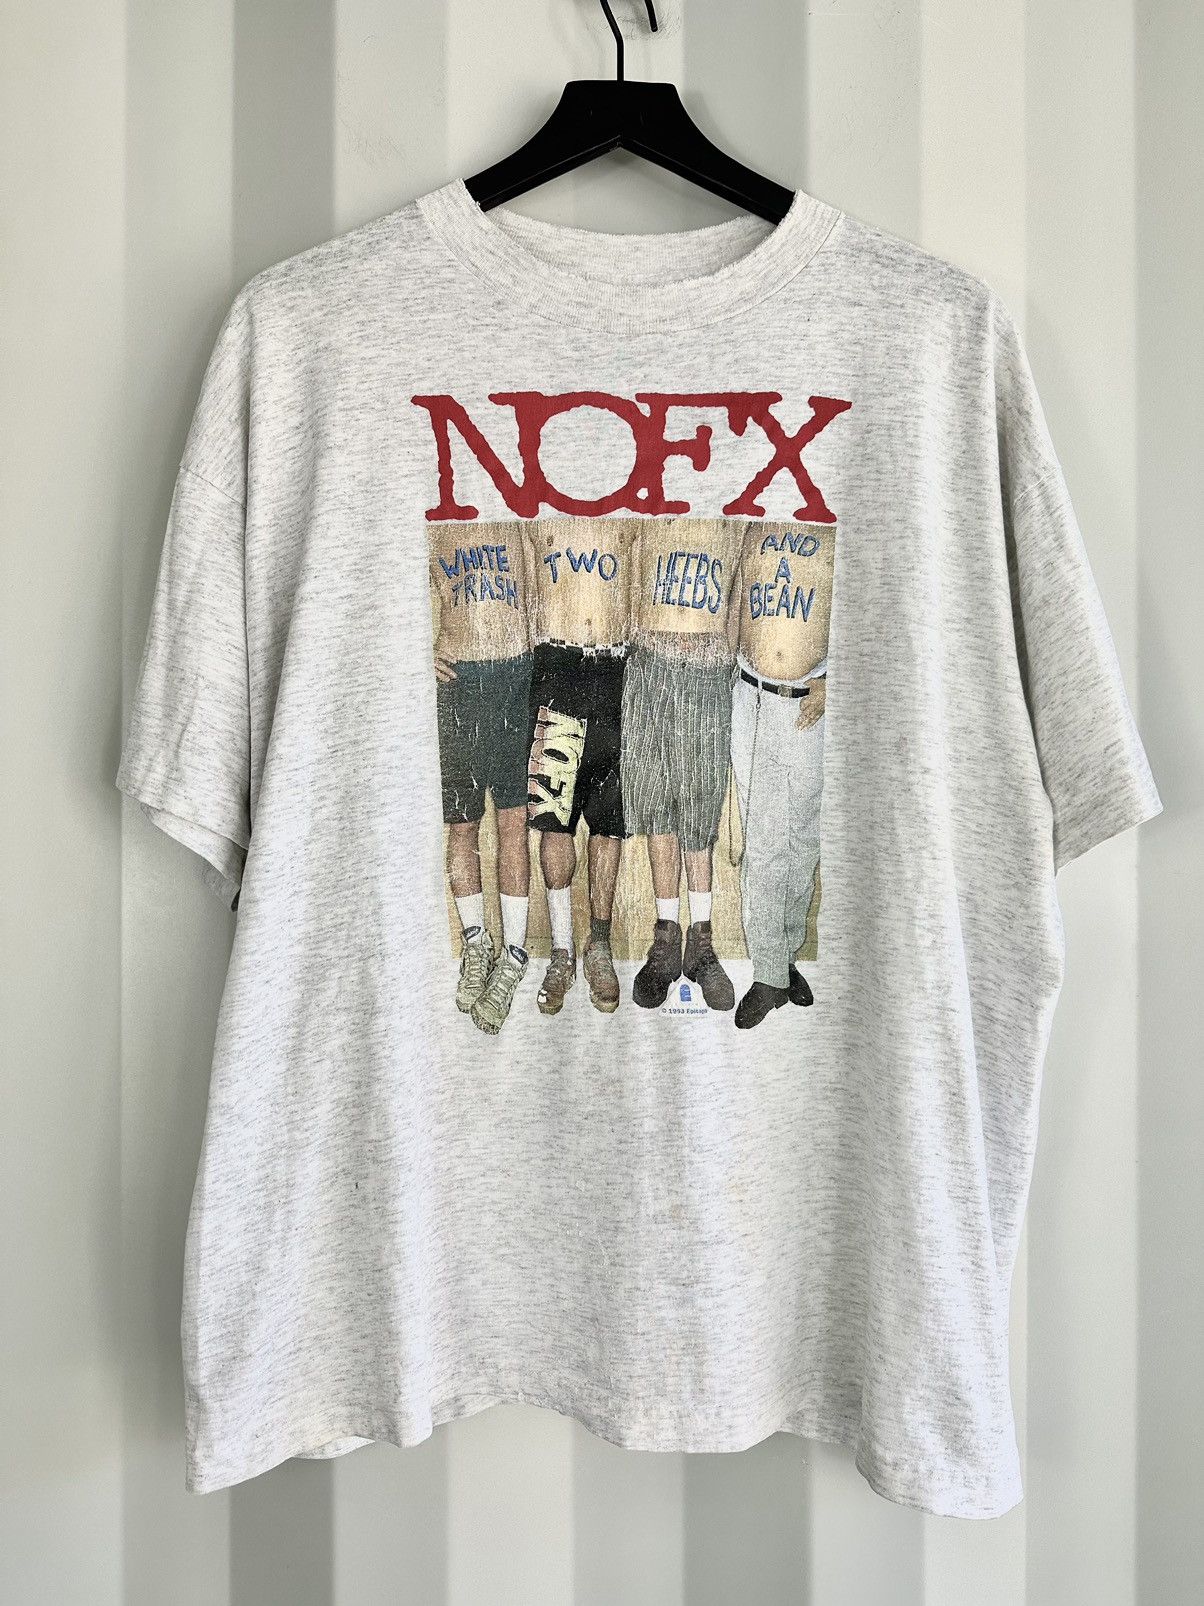 Pre-owned Band Tees X Vintage Nofx Fat Wreck Chords Tee In Grey